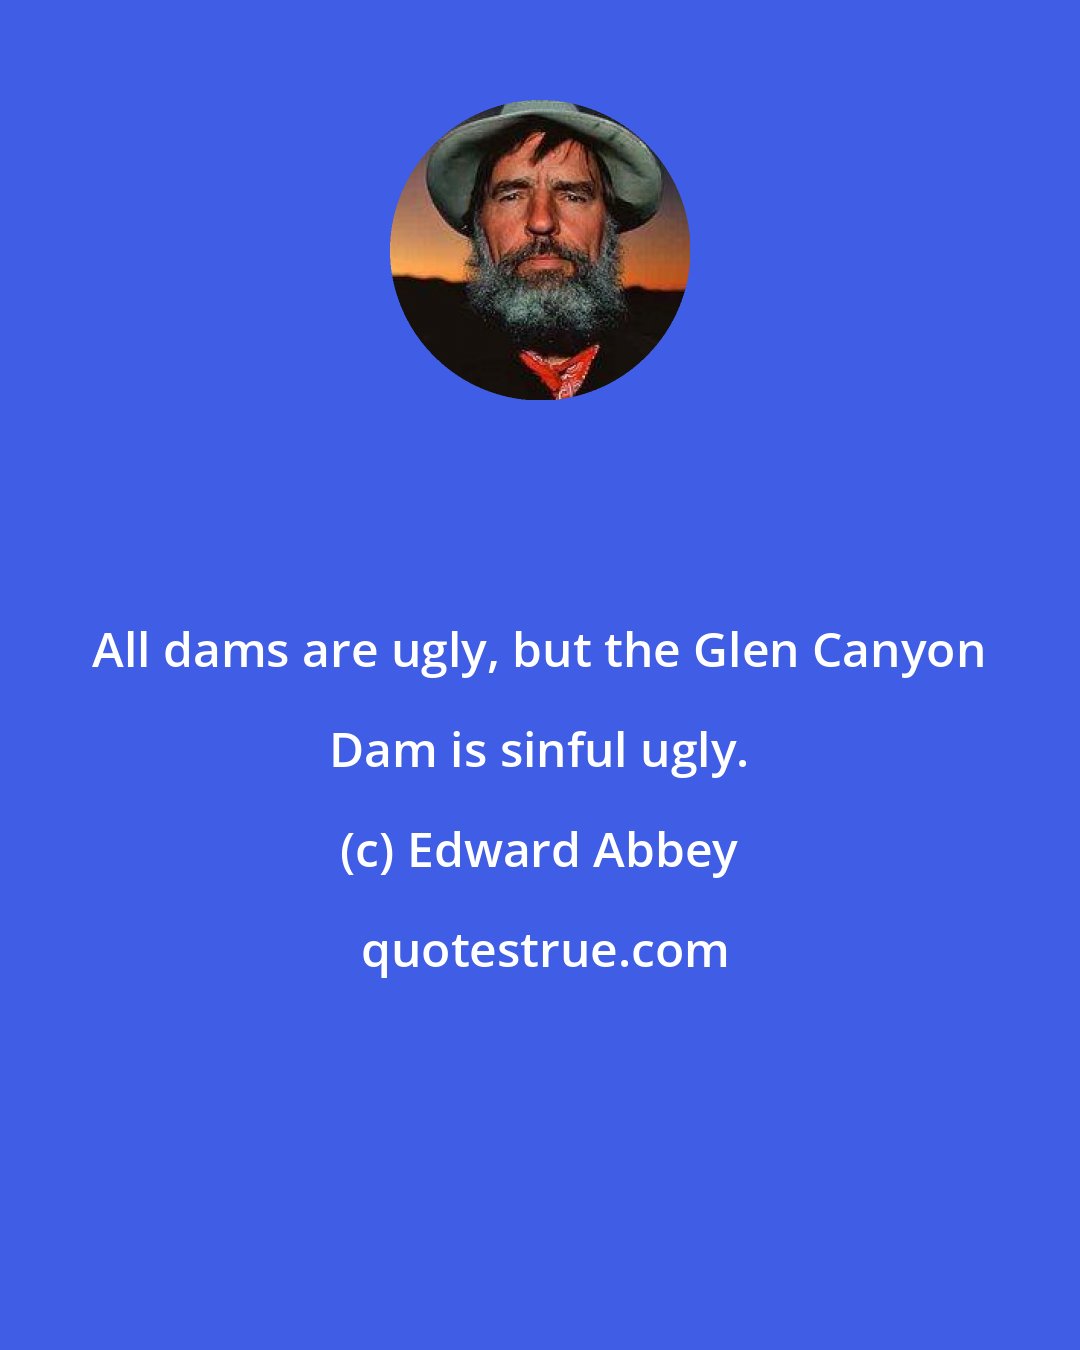 Edward Abbey: All dams are ugly, but the Glen Canyon Dam is sinful ugly.